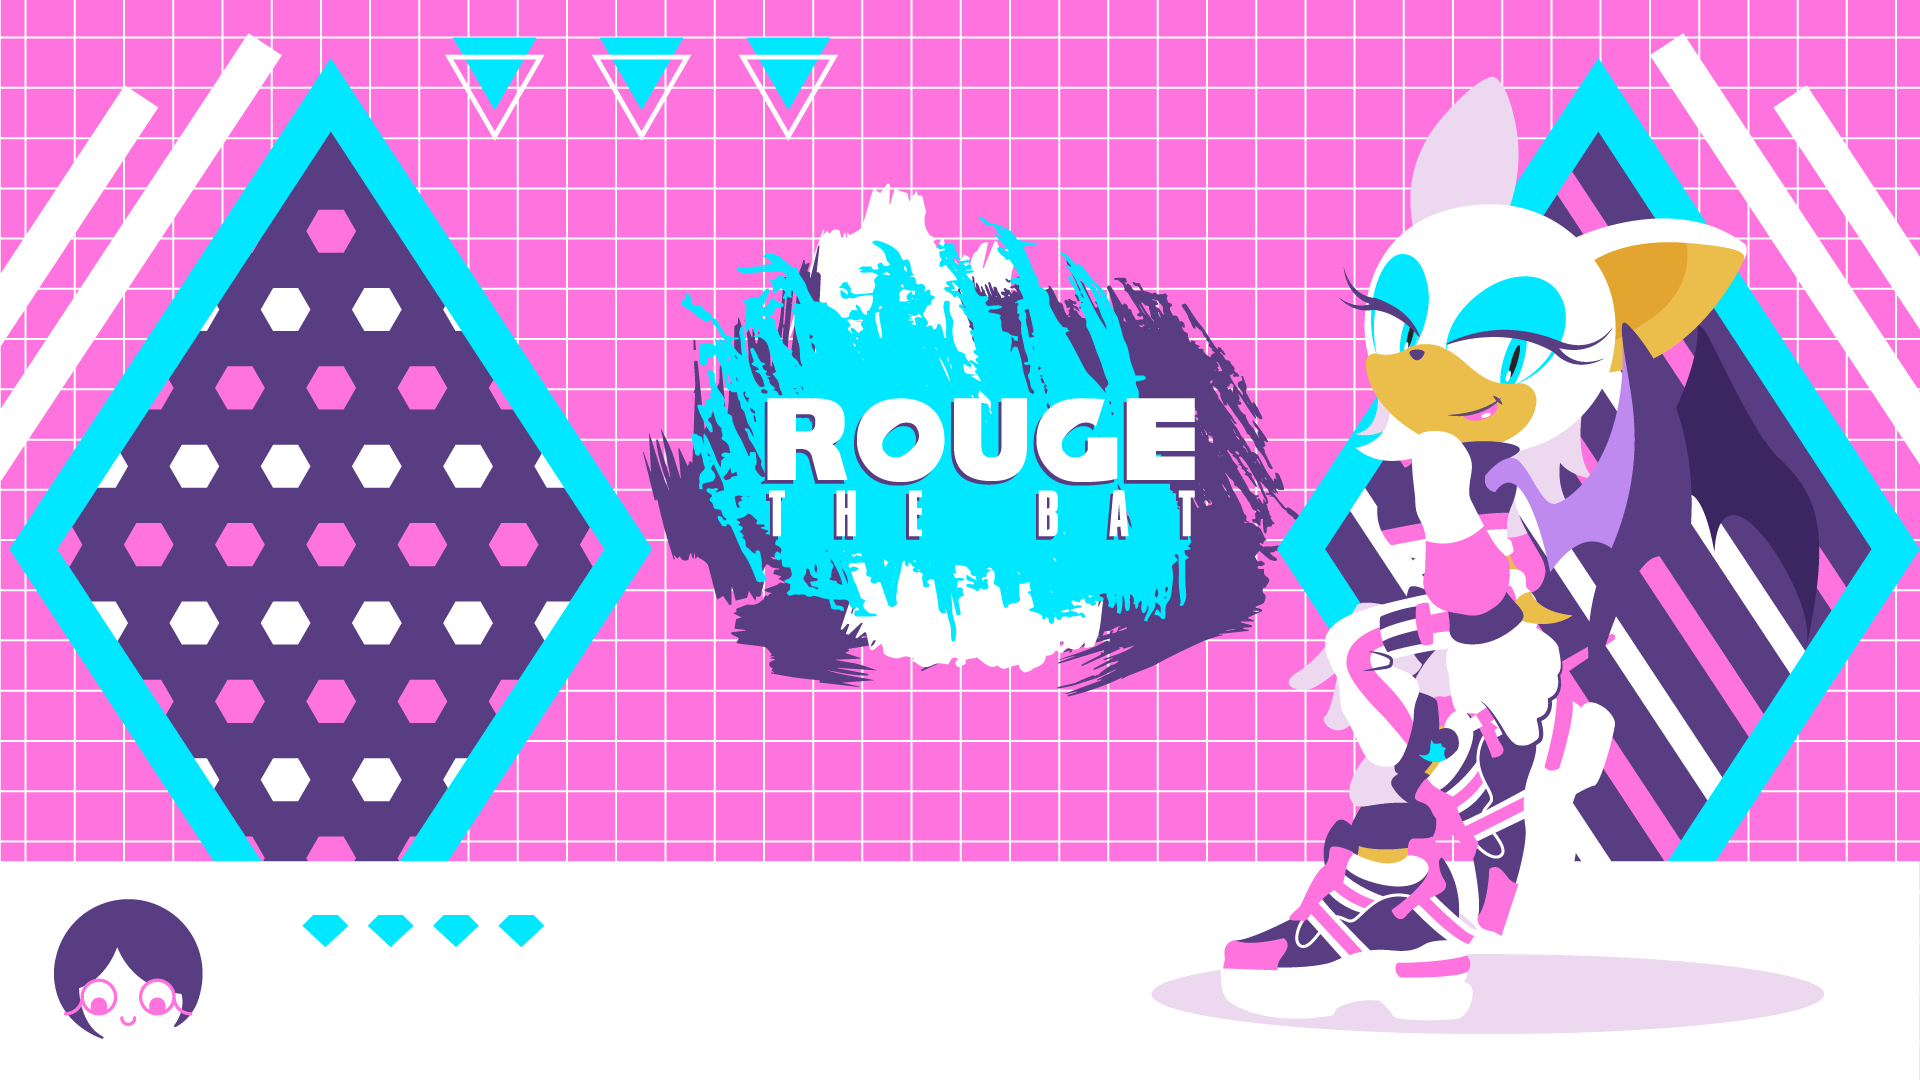 An illustration of Rouge the Bat, a pink fox with white fur, wearing sneakers and standing on a pink hexagonal background. - Sonic